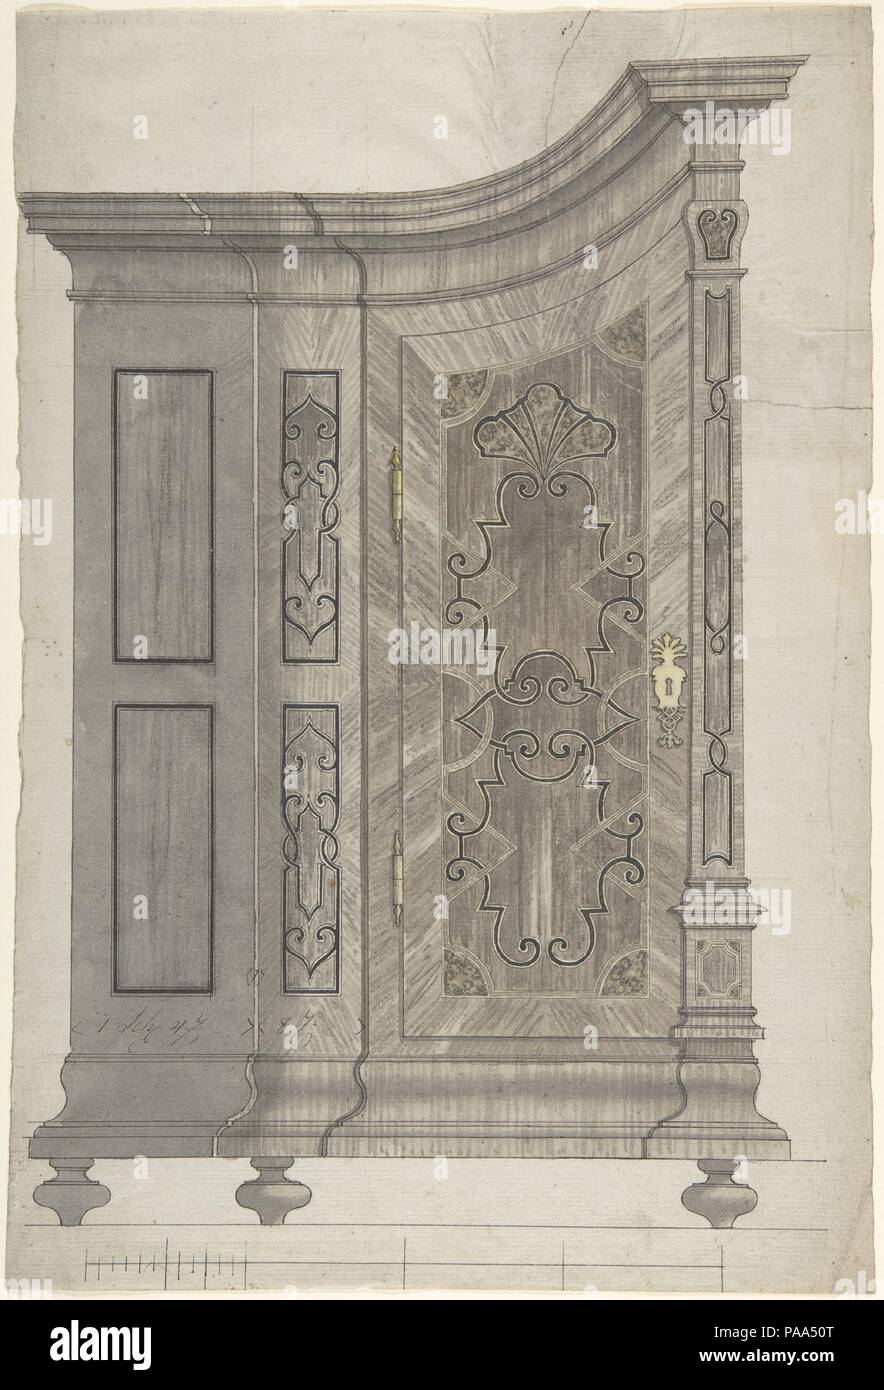 Design for a Concave Corner Cabinet (Possibly Part of a Larger Wall-Covering Unit). Artist: Anonymous, German, 18th century. Dimensions: sheet: 14 1/8 x 9 5/8 in. (35.8 x 24.5 cm). Date: ca. 1730-40.  Although at first sight this design for a cabinet may appear somewhat strange, a second view tells us that we're looking at the somewhat flattened perspectival view of a concave corner cabinet. A very similar shaped example can be found in the secret library of the Benedictine monastery at Ottobeuren (Schwaben, Germany), where it is part of a larger wall unit dated 1730. The decorations of both c Stock Photo